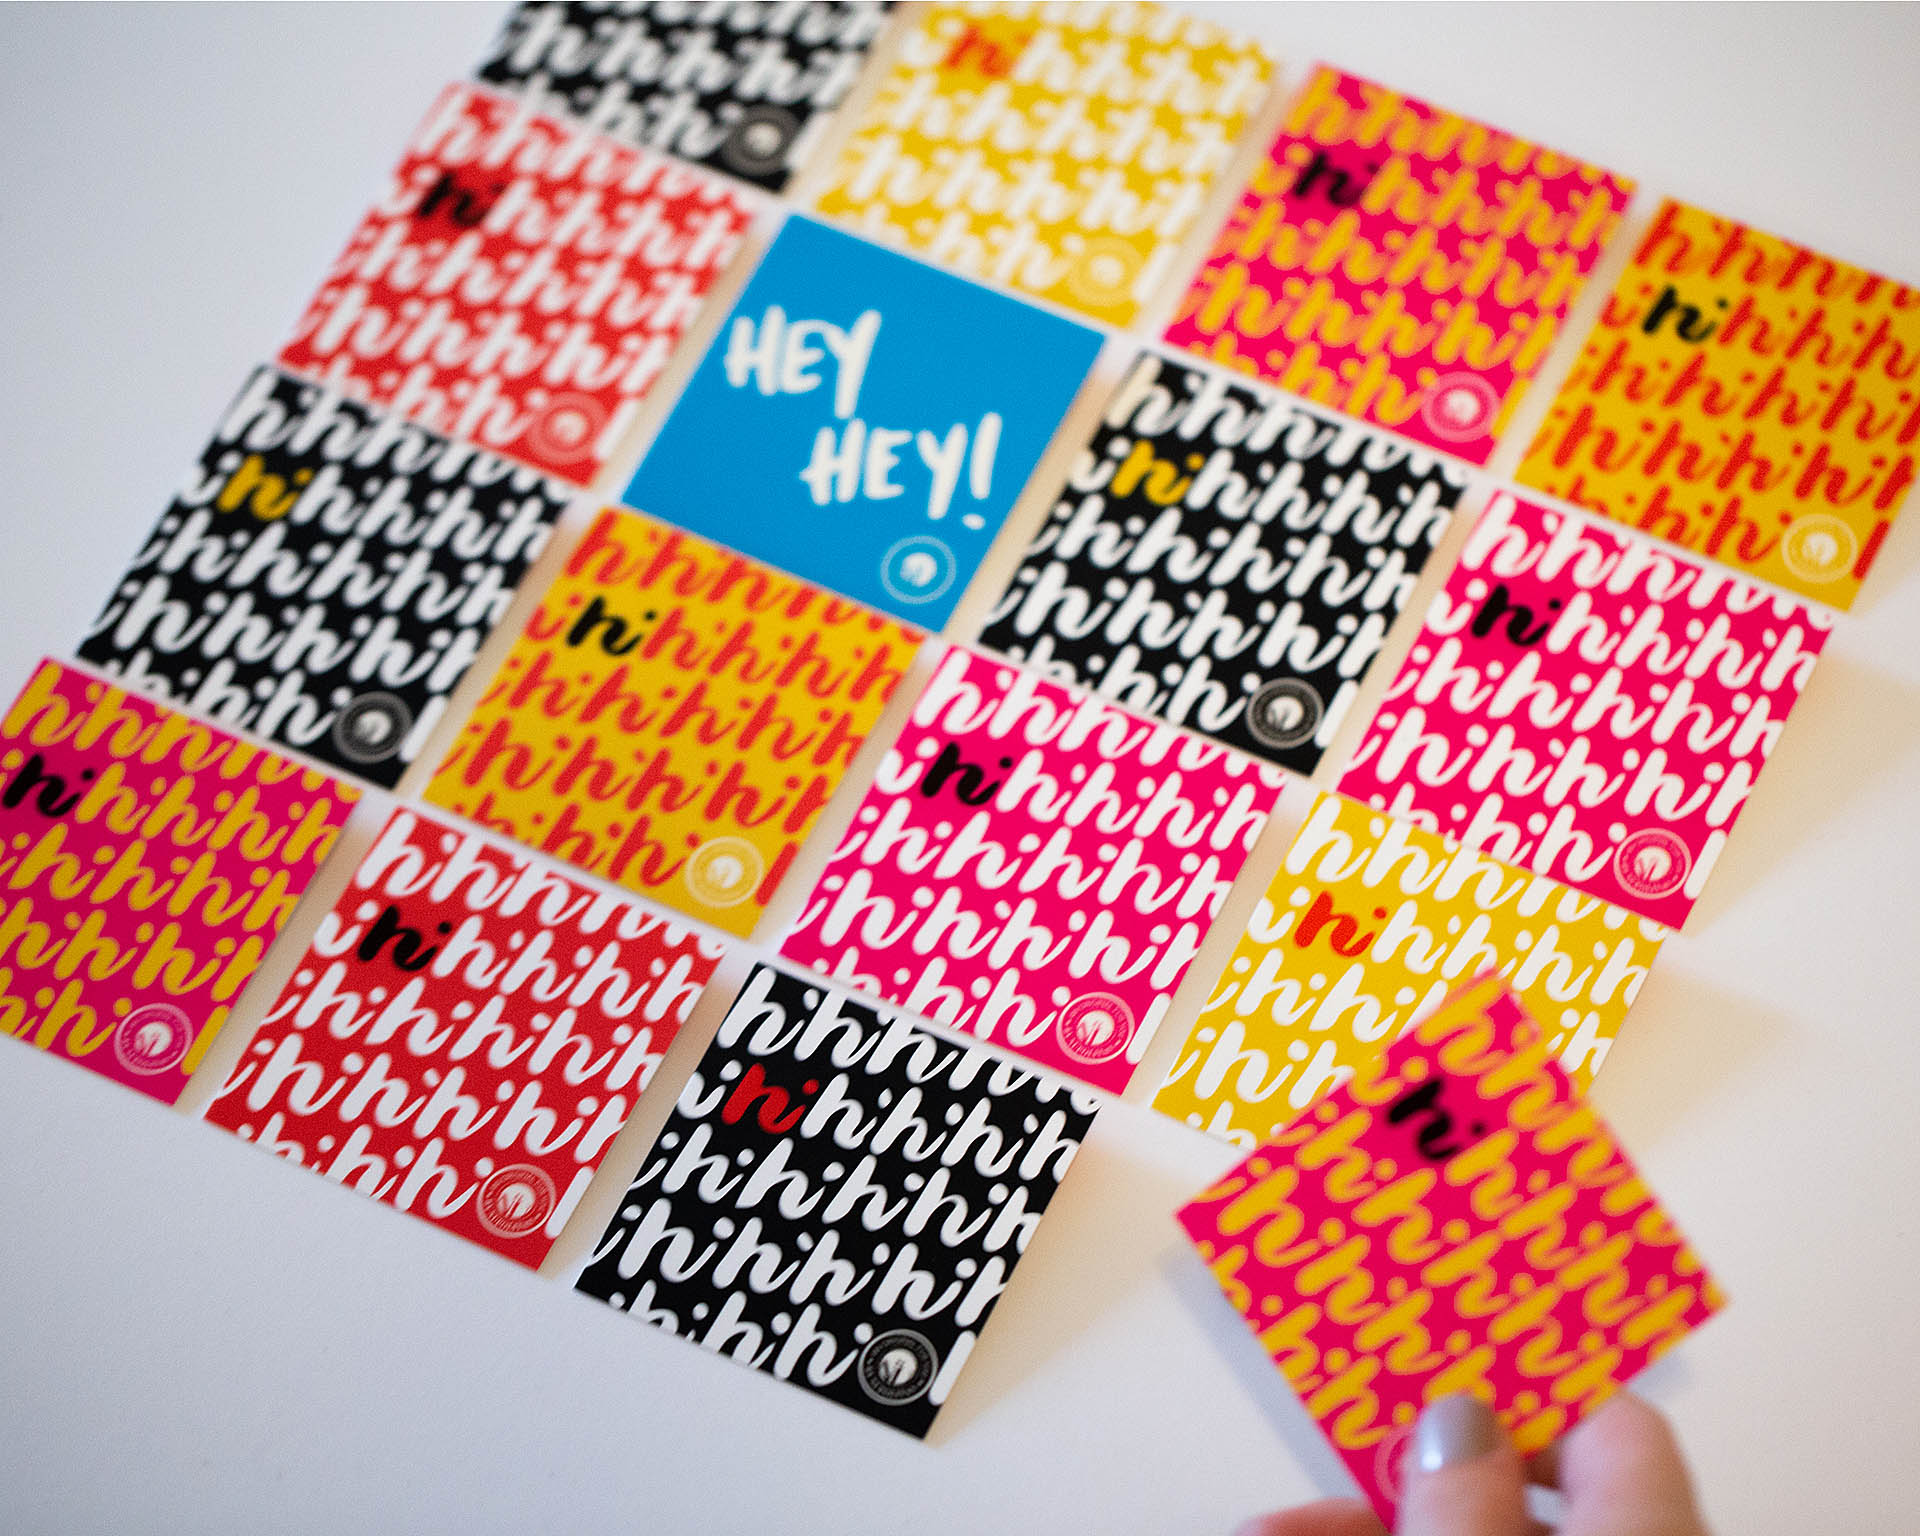 A hand grabbing the corner card out of a grid of colorful square cards